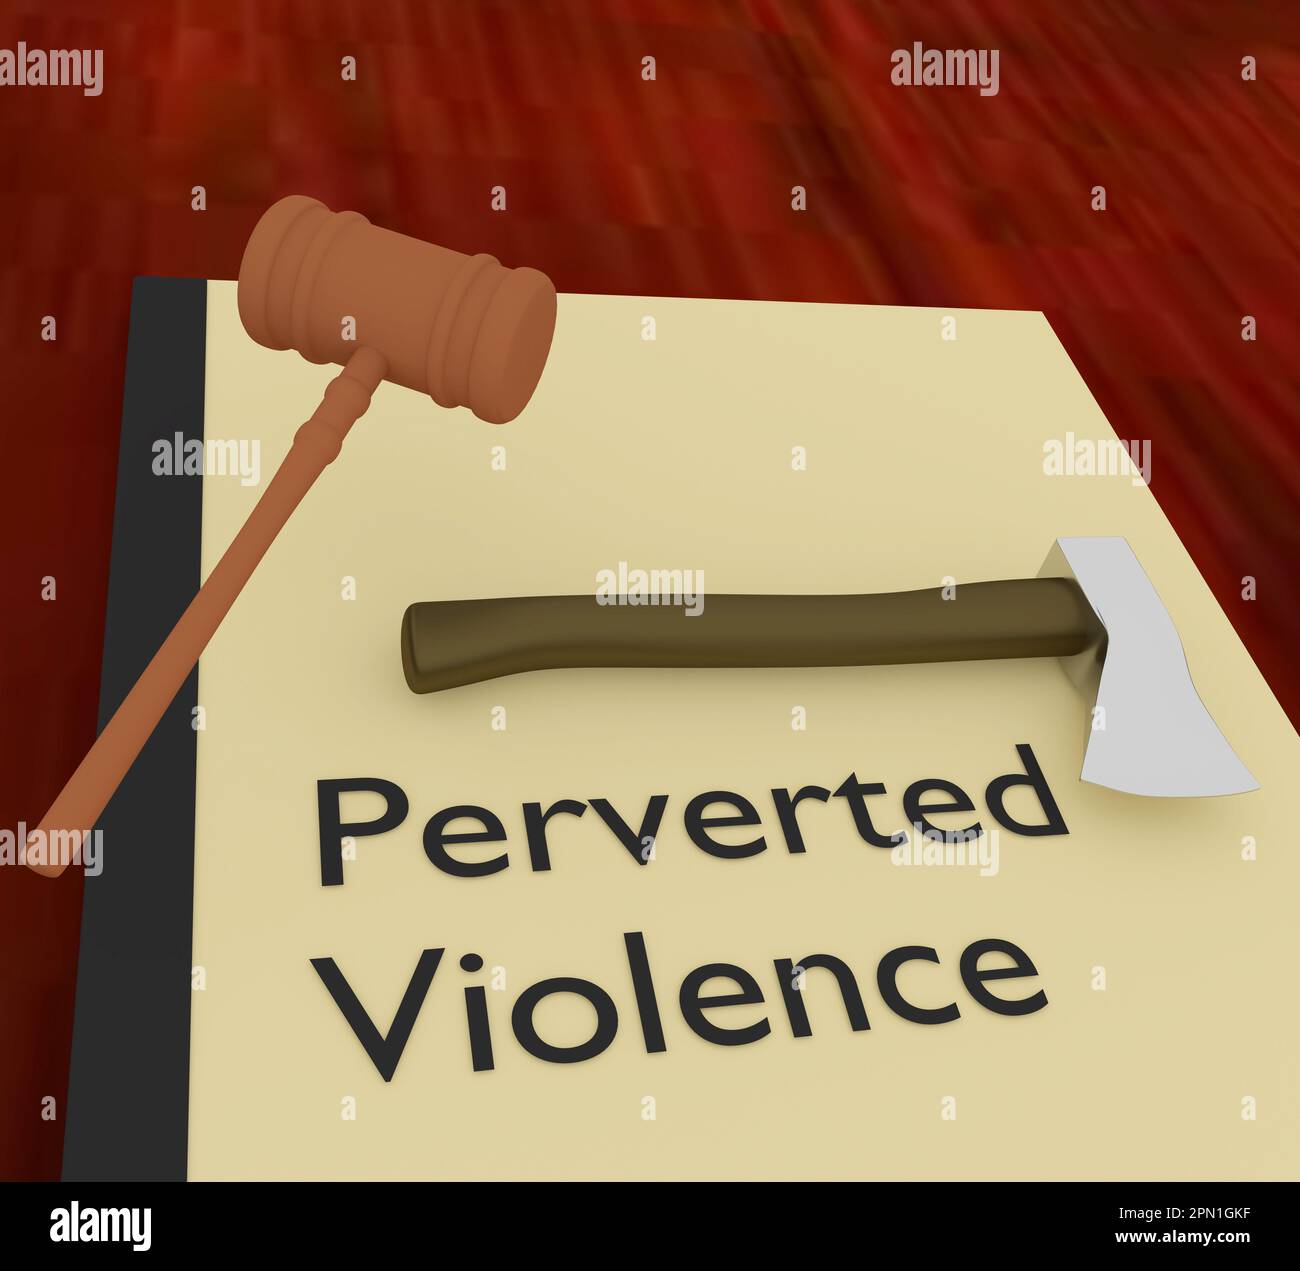 3D illustration of a judge gavel and Perverted Violence title on legal booklet, along with an ax. Stock Photo